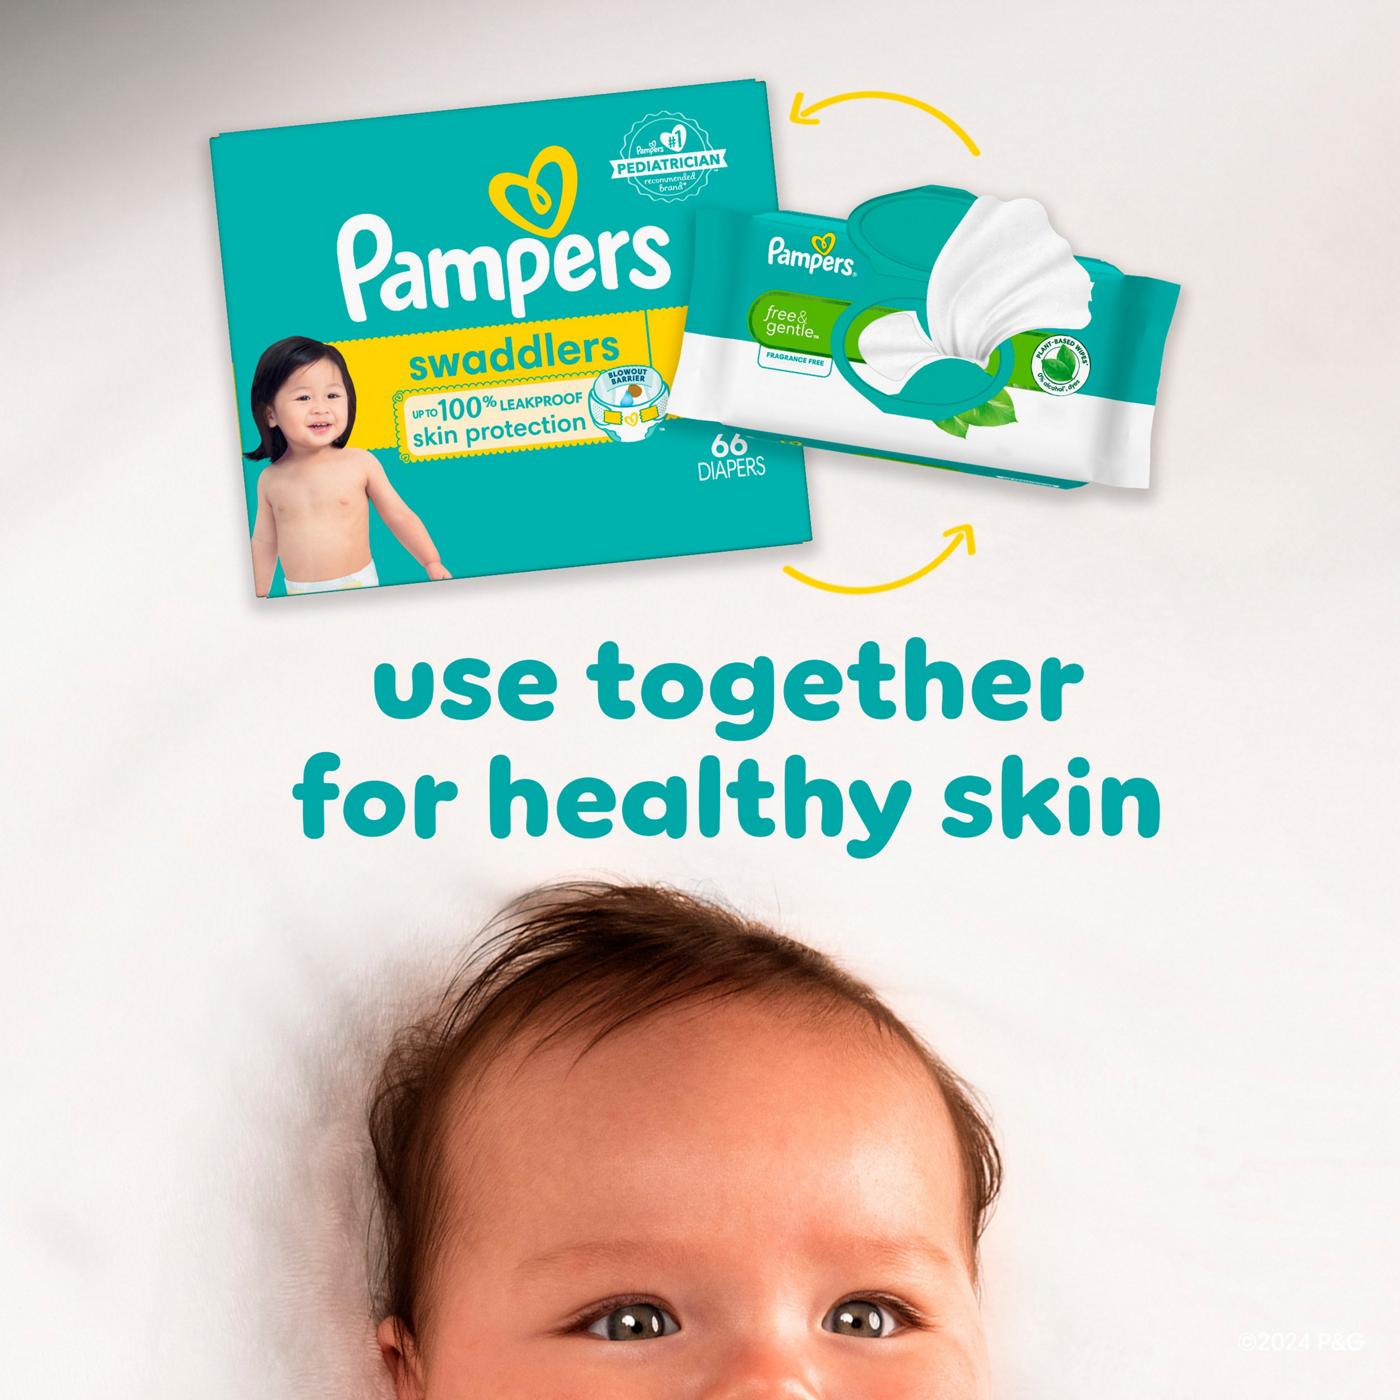 Pampers Free & Gentle Plant Based Baby Wipes; image 5 of 10